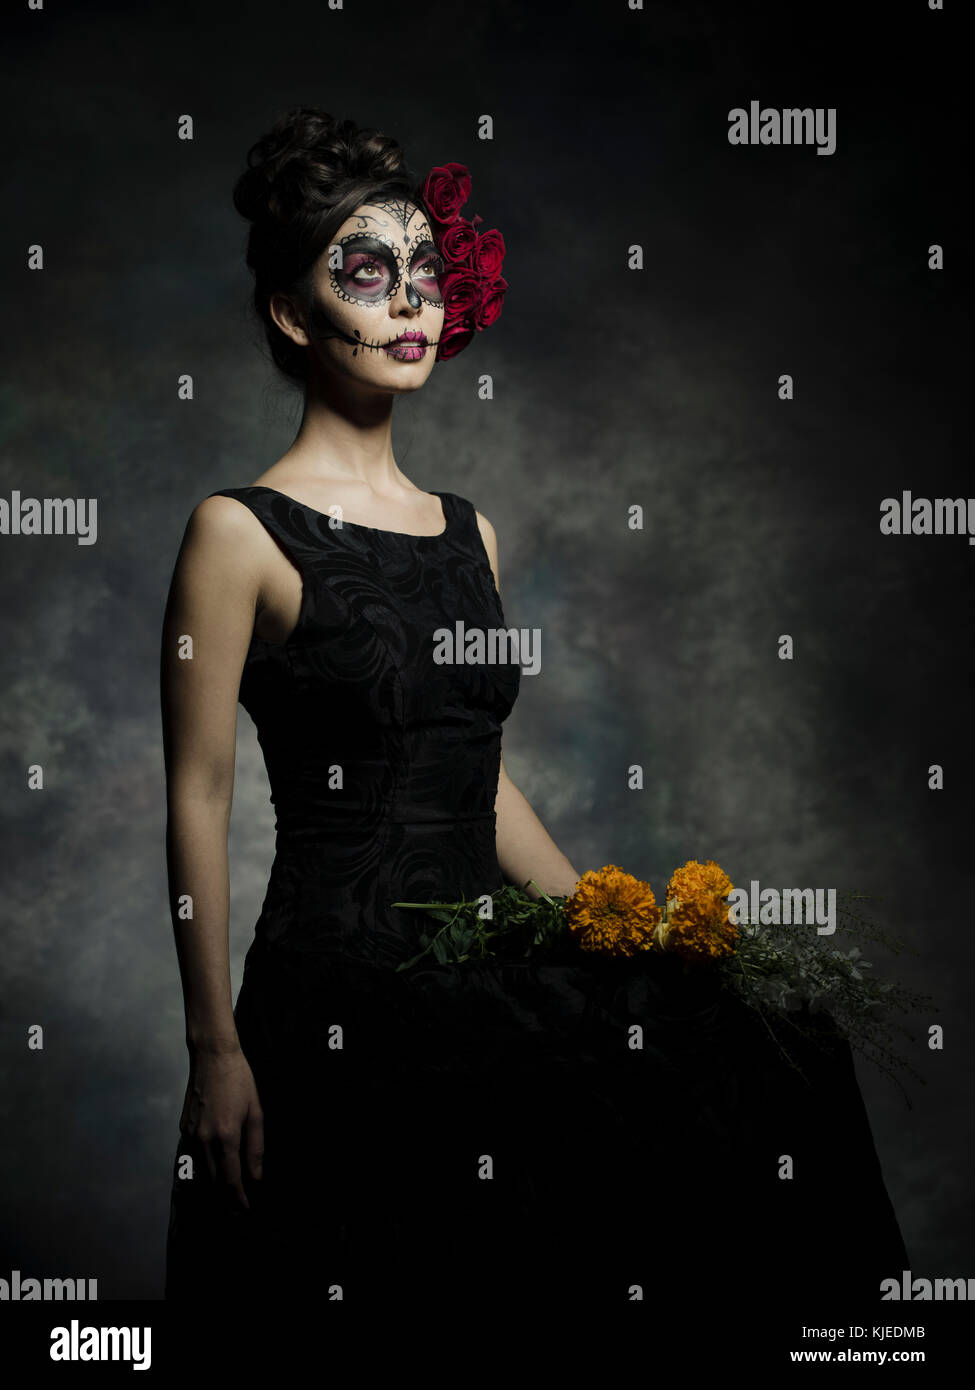 Beautiful Mexican American woman celebrating Día de los Muertos ( Día de Muertos ) is the Mexican holiday also known as Day of the Dead with skull makeup and roses in the style of Catrina. Stock Photo